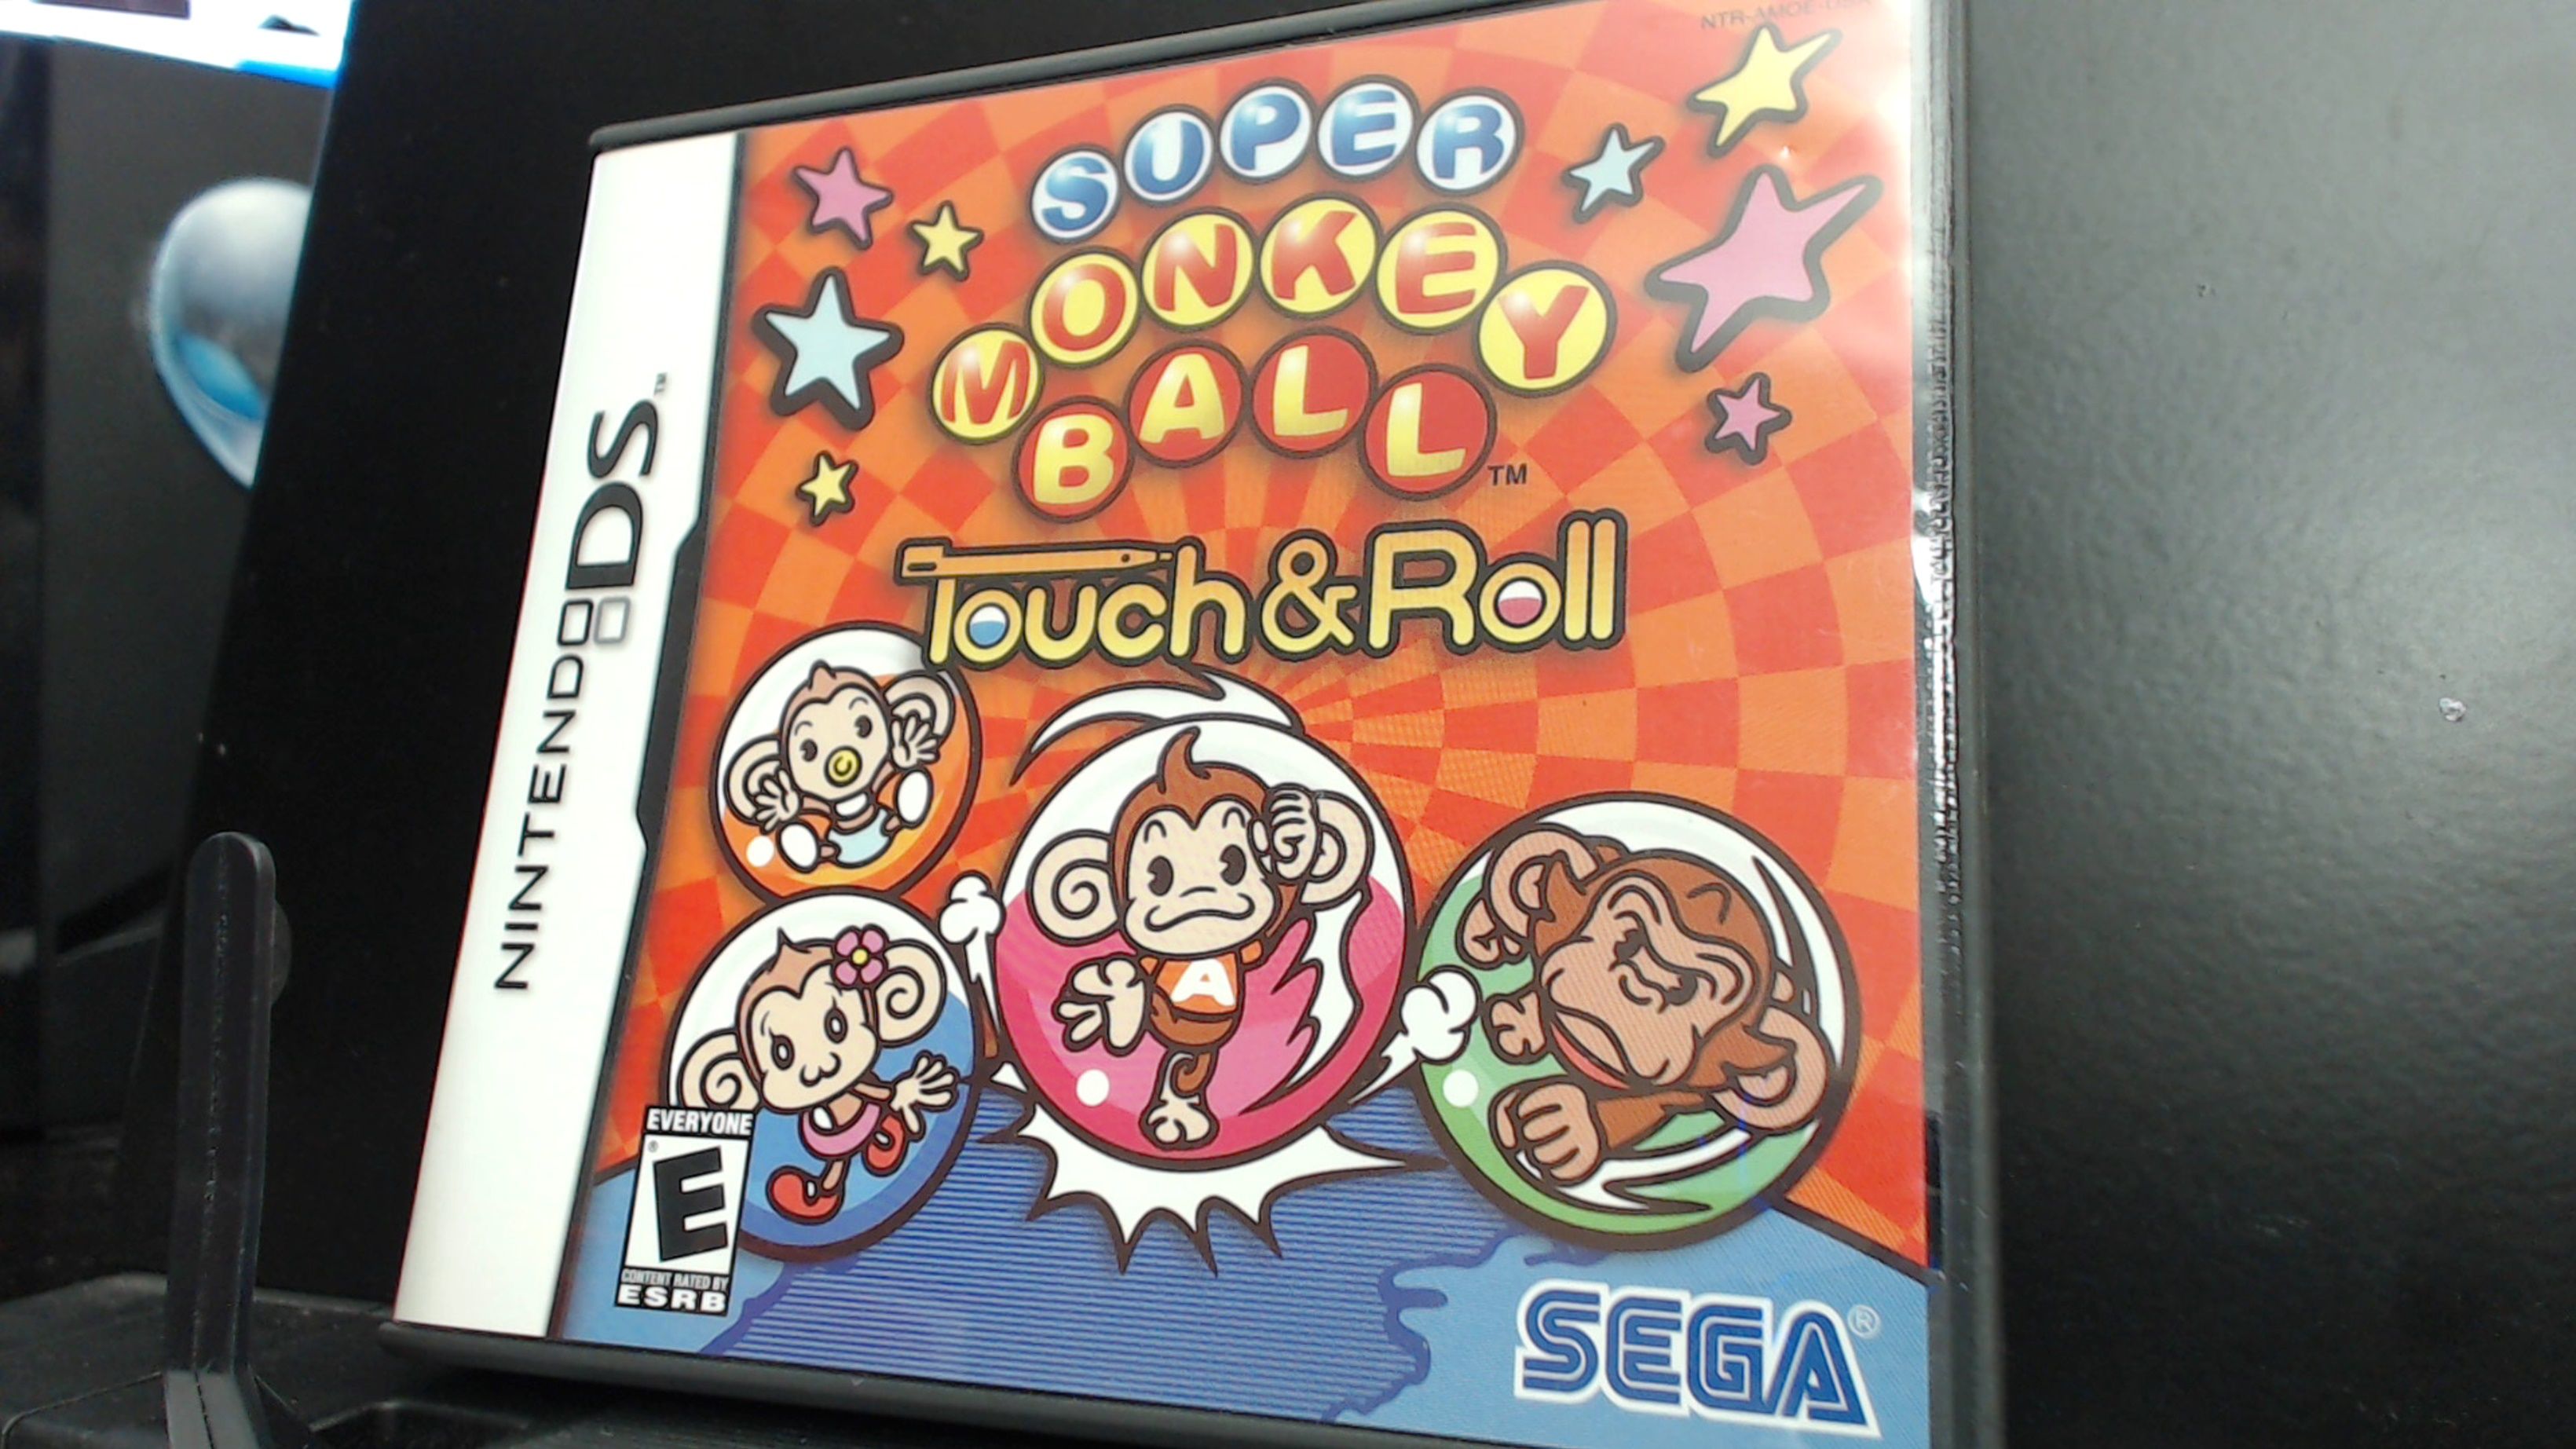 Super Monkey Ball: Touch and Roll - Nintendo DS